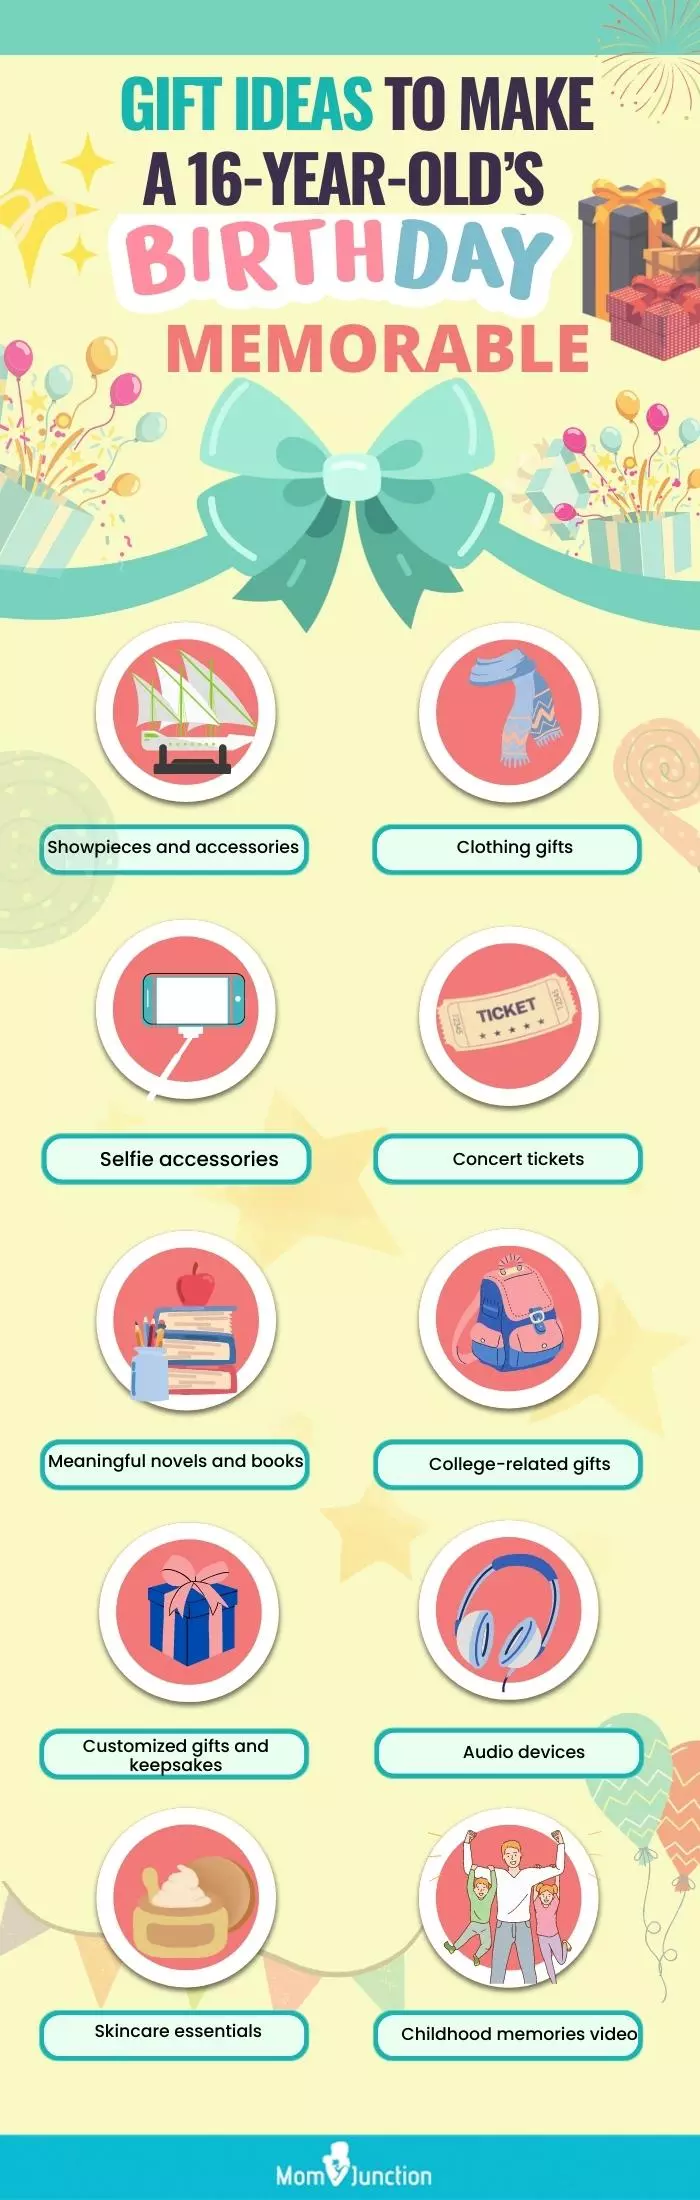 gift ideas to make a 16 year old’s birthday memorable (infographic)